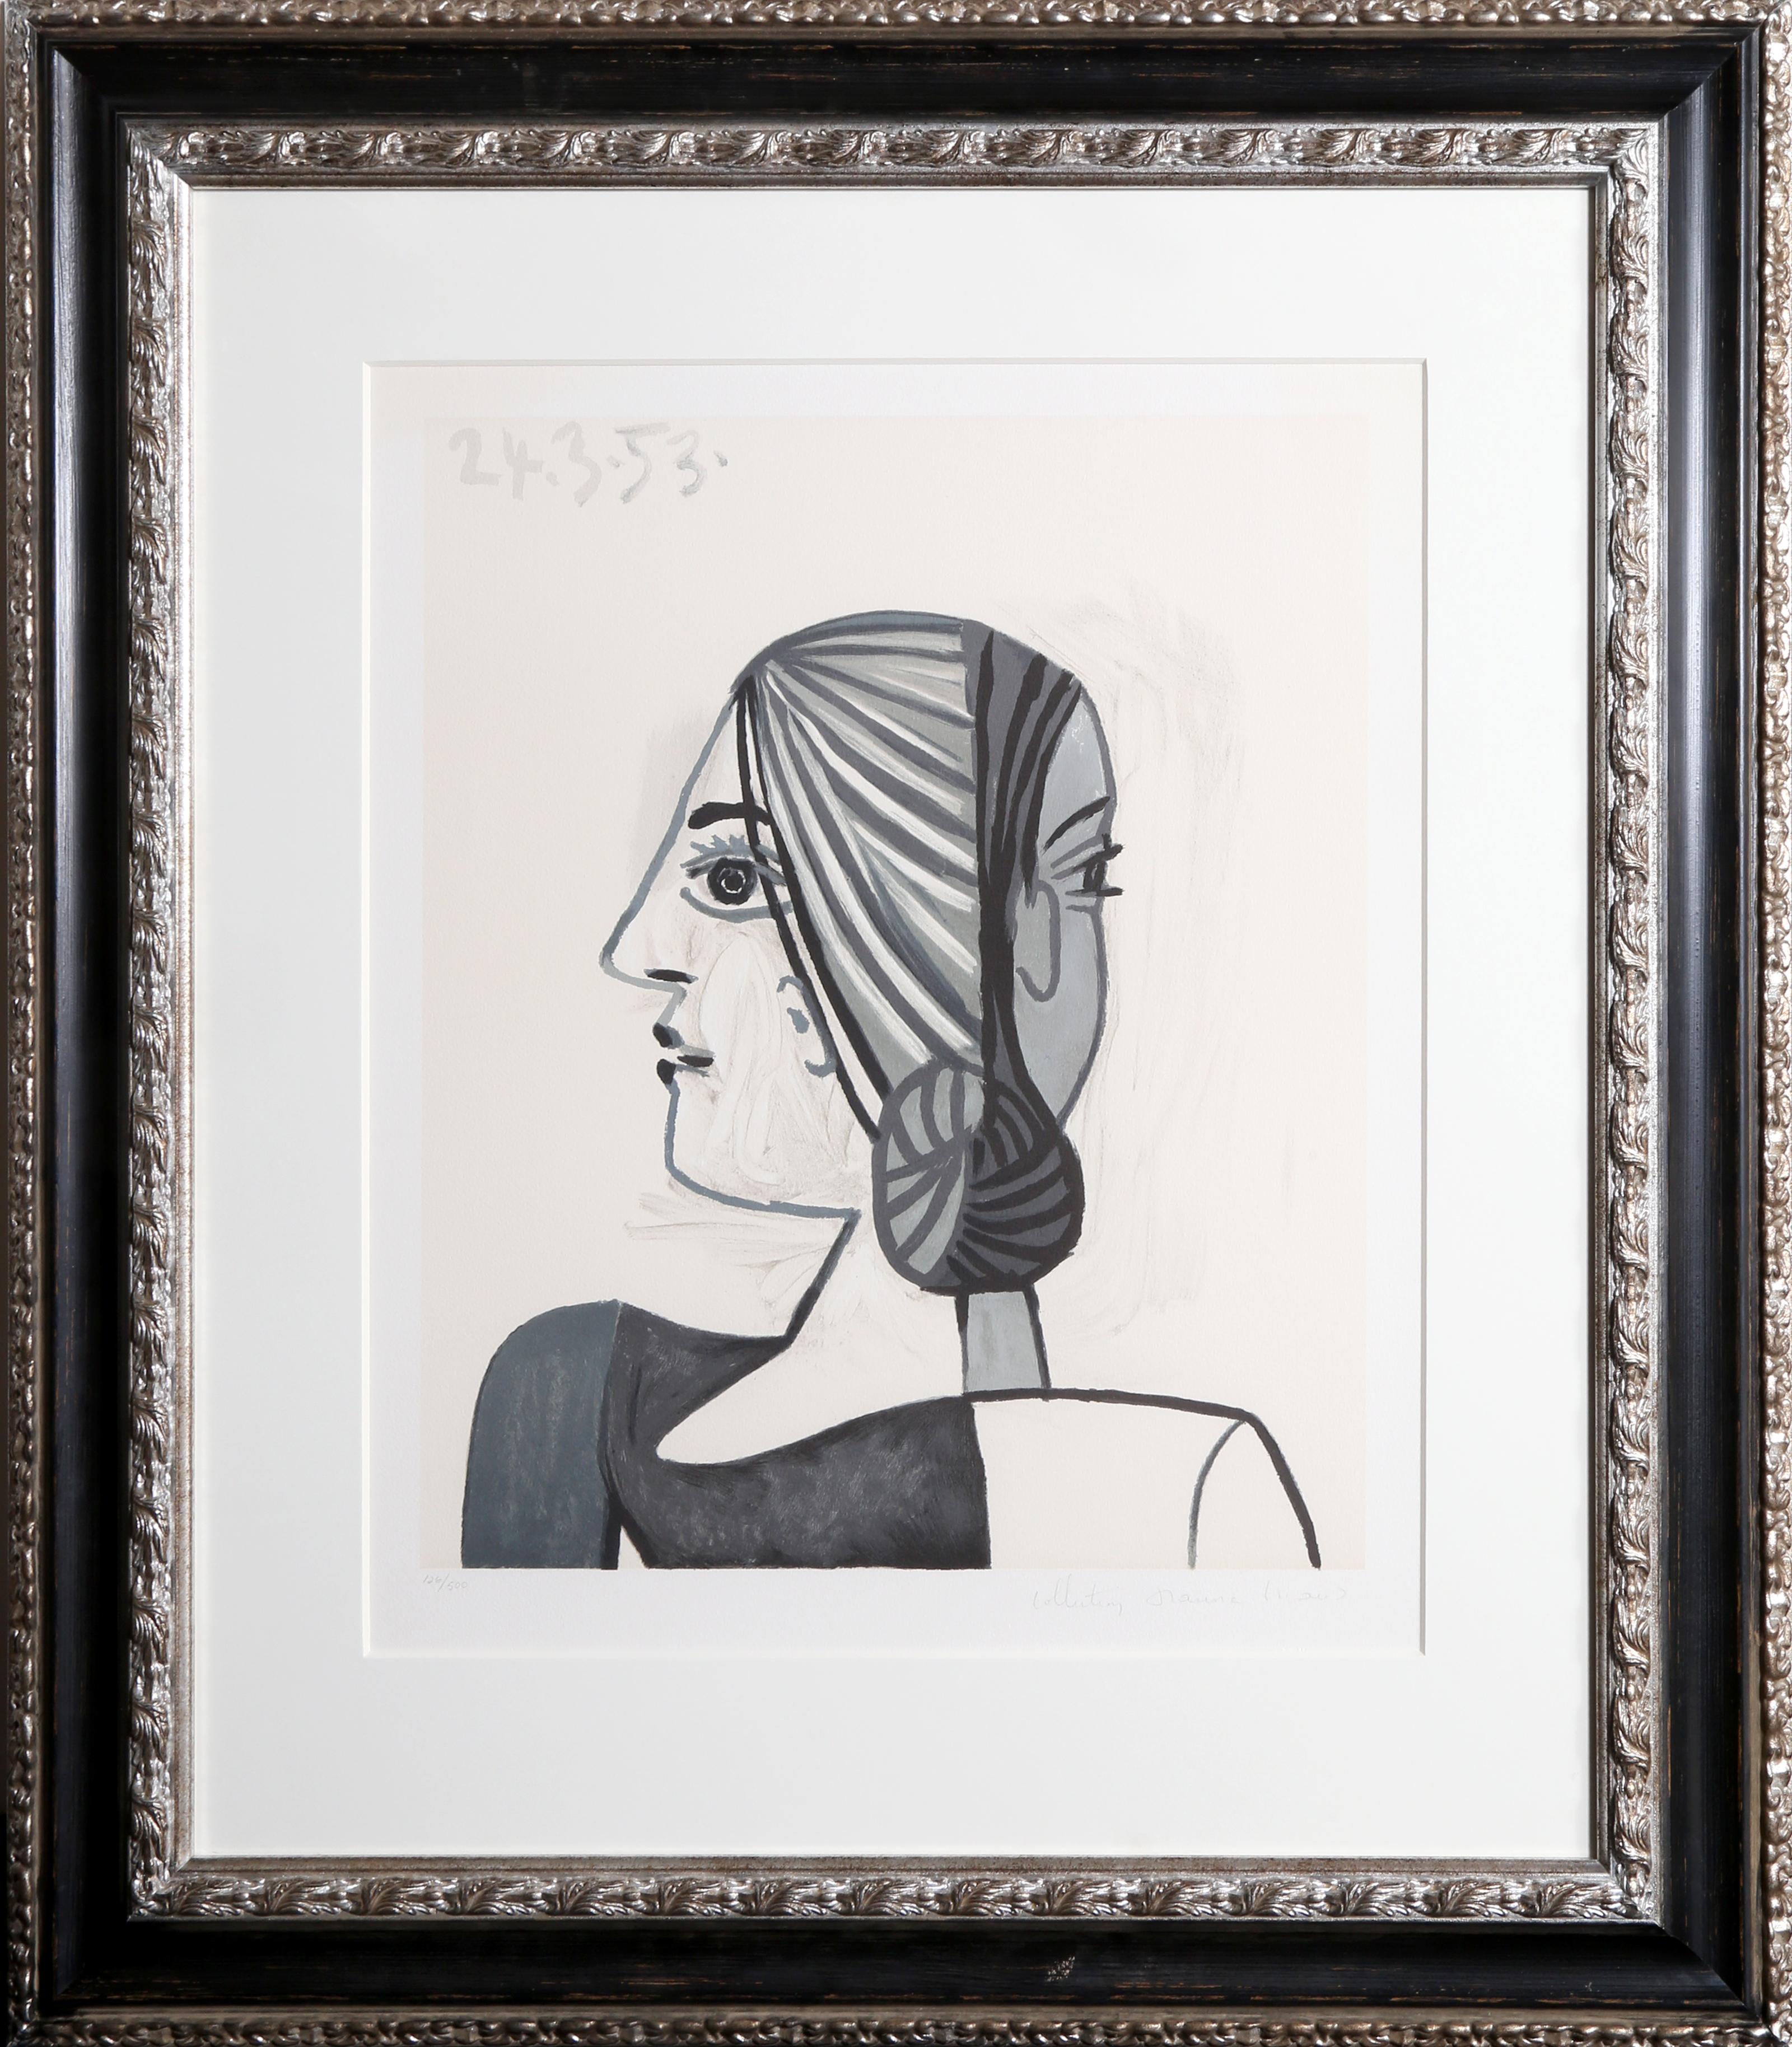 A lithograph from the Marina Picasso Estate Collection after the Pablo Picasso painting "Tete". The original painting was completed in 1954. In the 1970's after Picasso's death, Marina Picasso, his granddaughter, authorized the creation of this